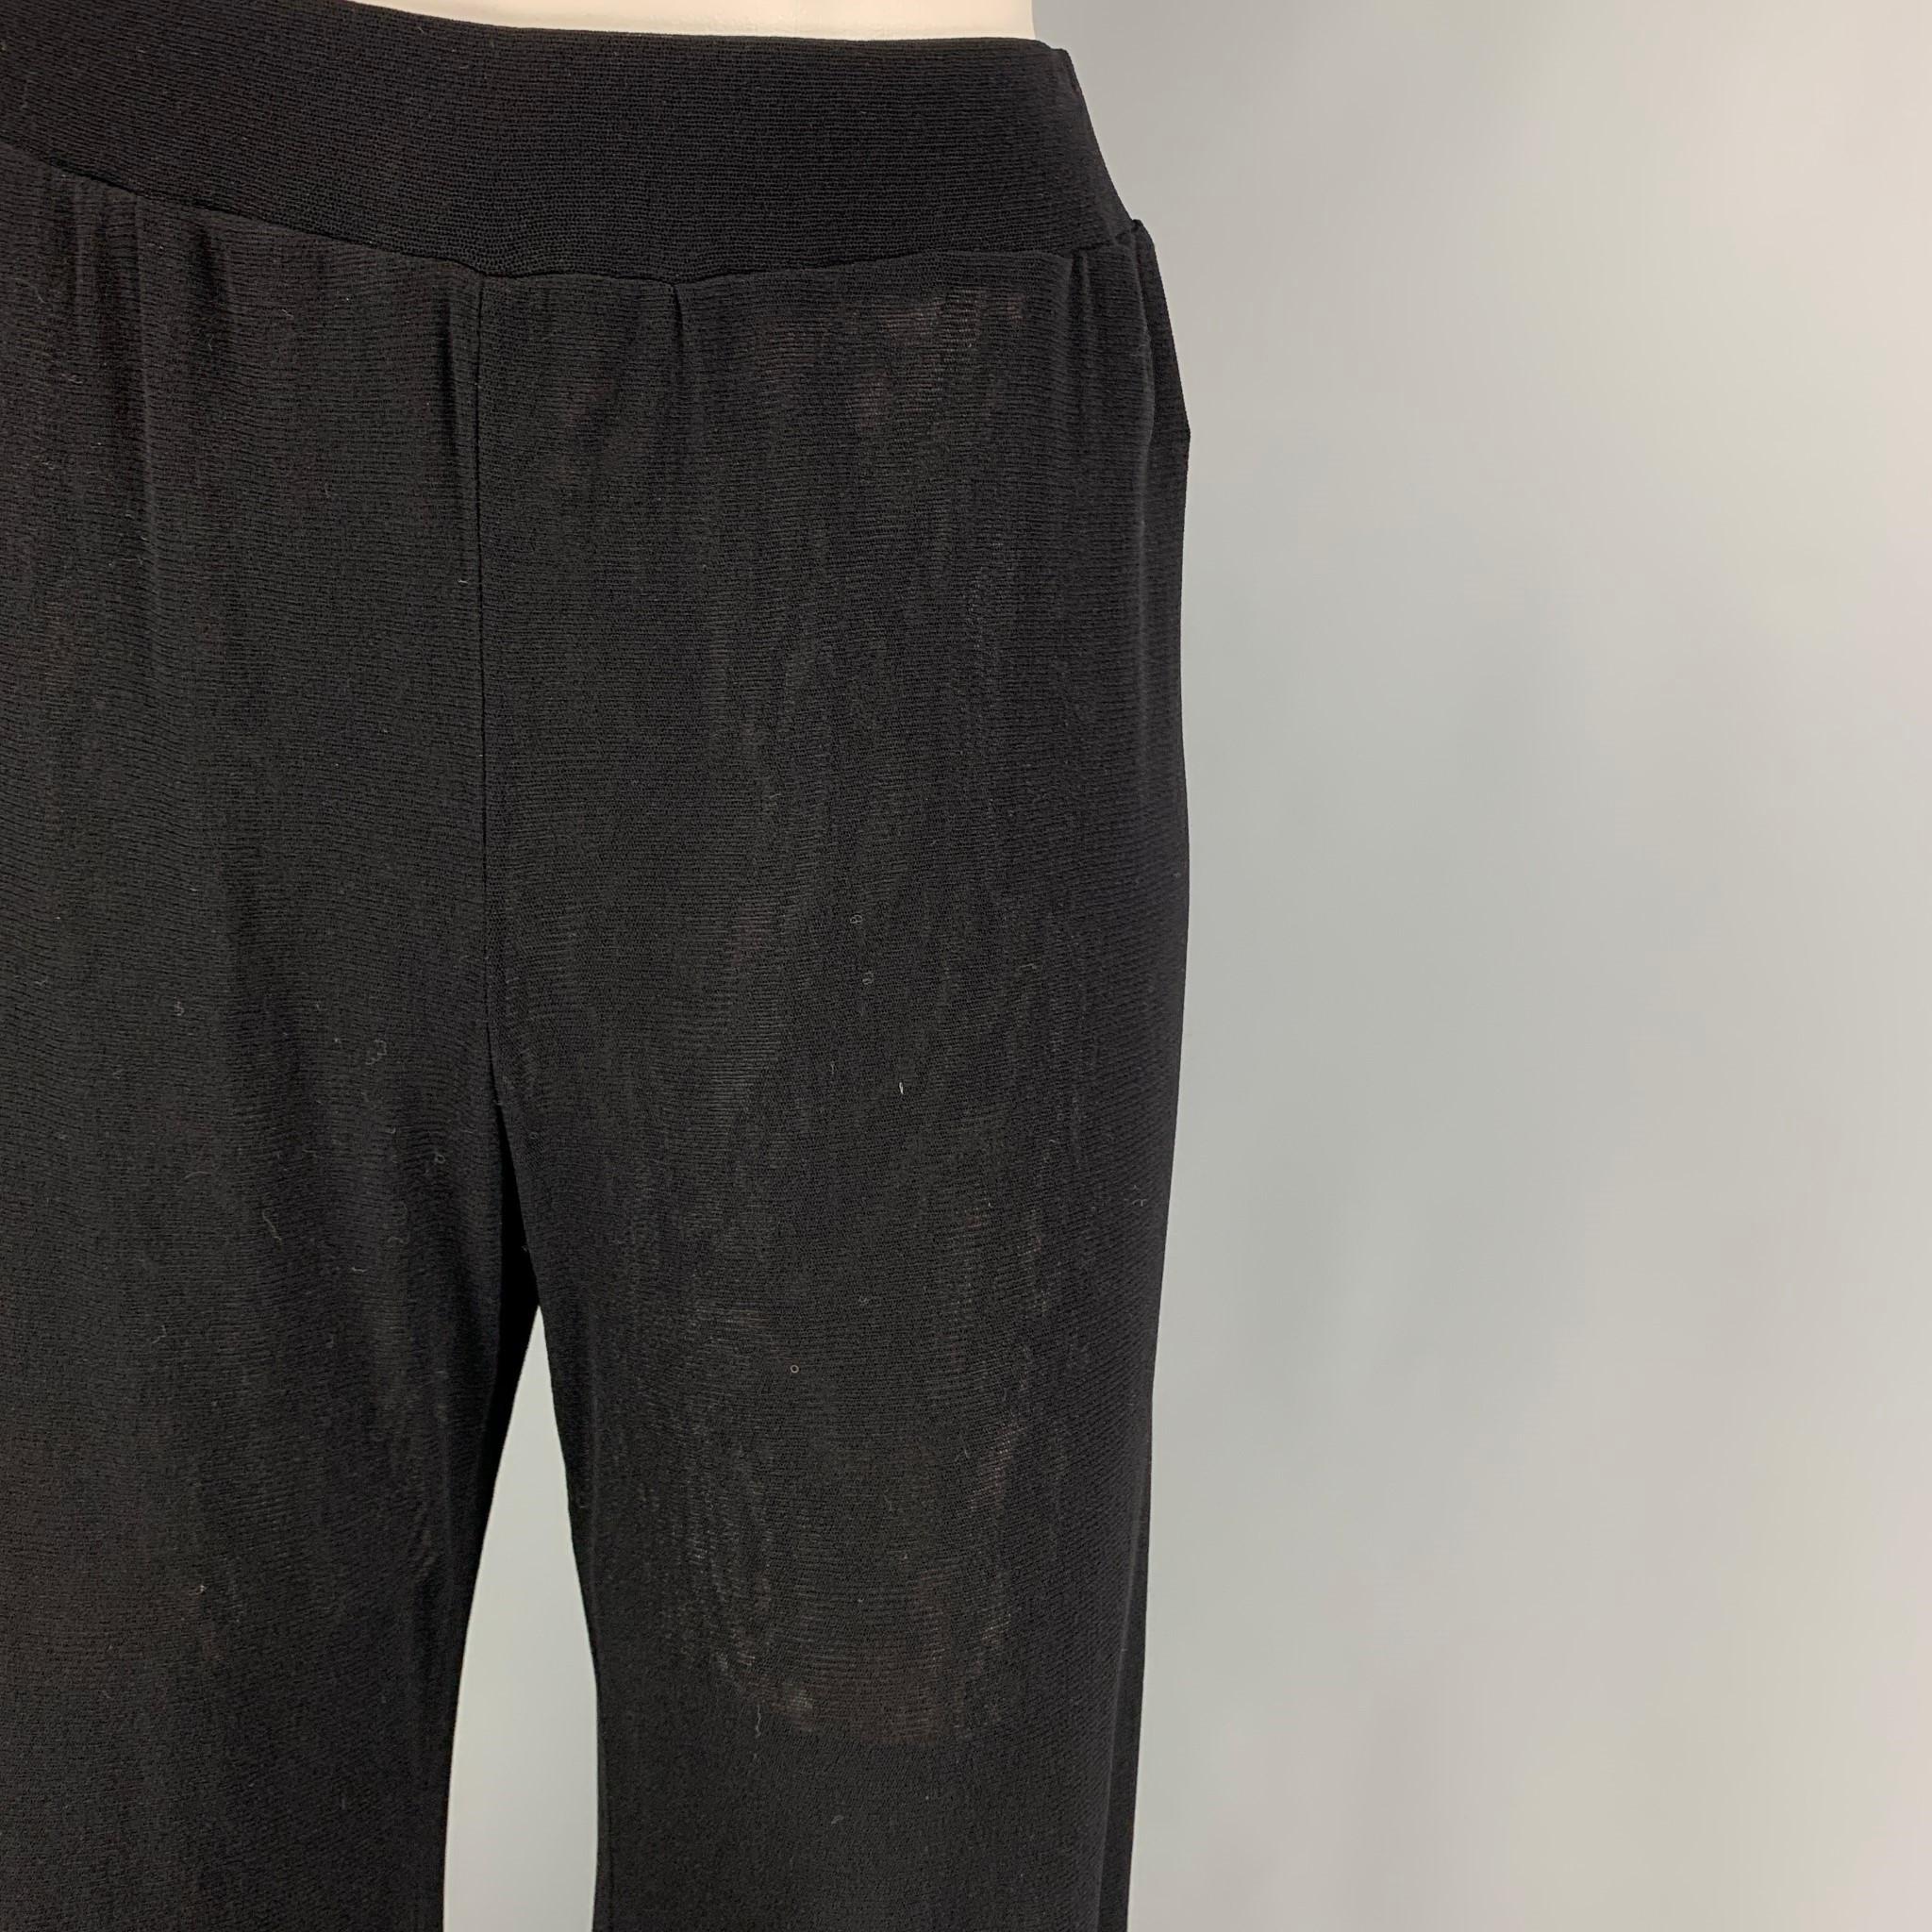 JEAN PAUL GAULTIER 'SOLEIL' pants comes in a black mesh nylon featuring a elastic waist and elastic cuffs. Made in Italy. 

Very Good Pre-Owned Condition.
Marked: L

Measurements:

Waist: 28 in.
Rise: 12 in.
Inseam: 31 in. 